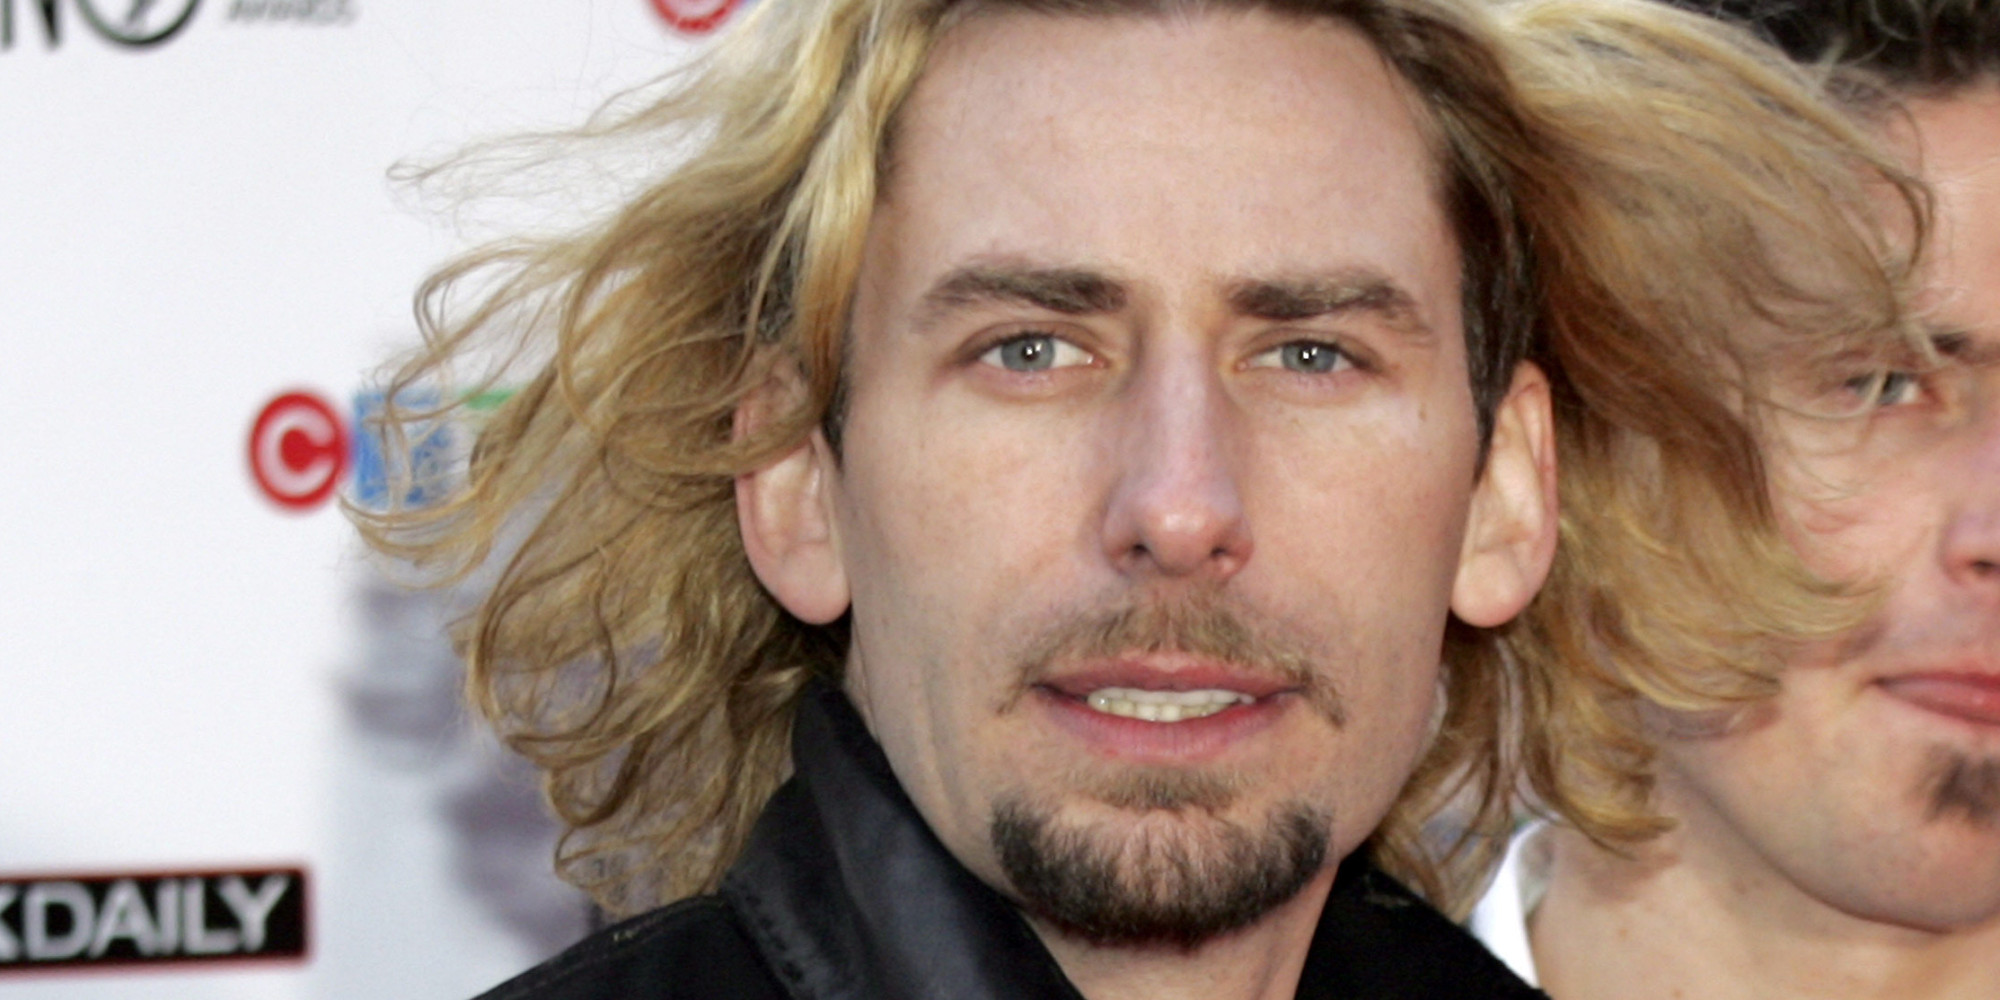 Nickelback's Chad Kroeger And His Hair Throughout The Years